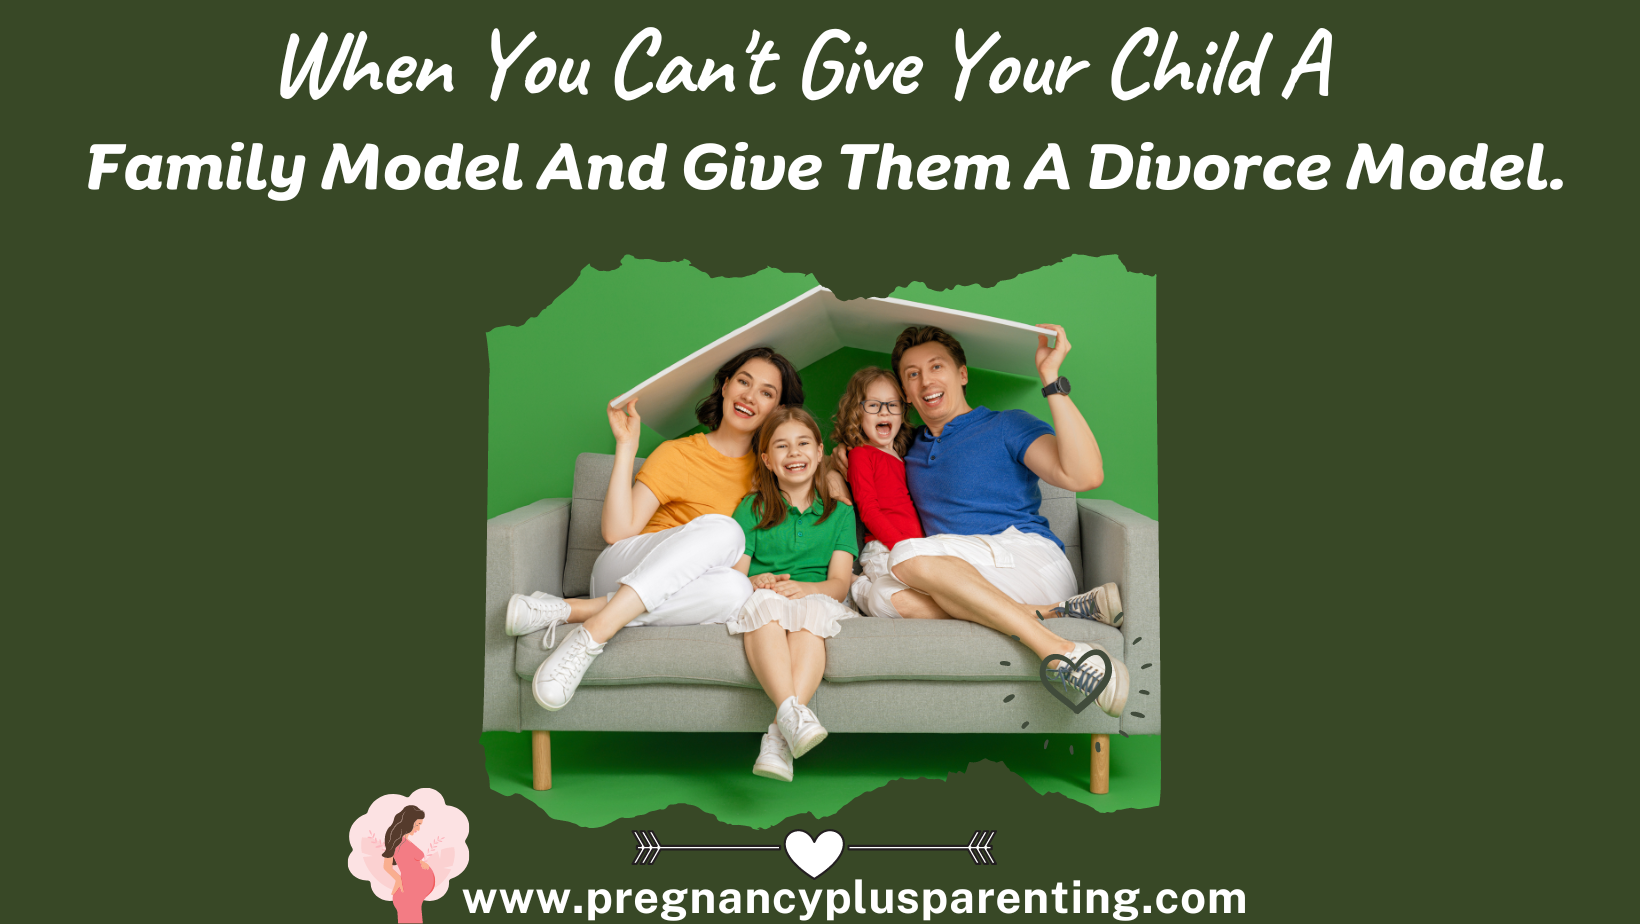 When You Can't Give Your Child A Family Model And Give Them A Divorce Model.